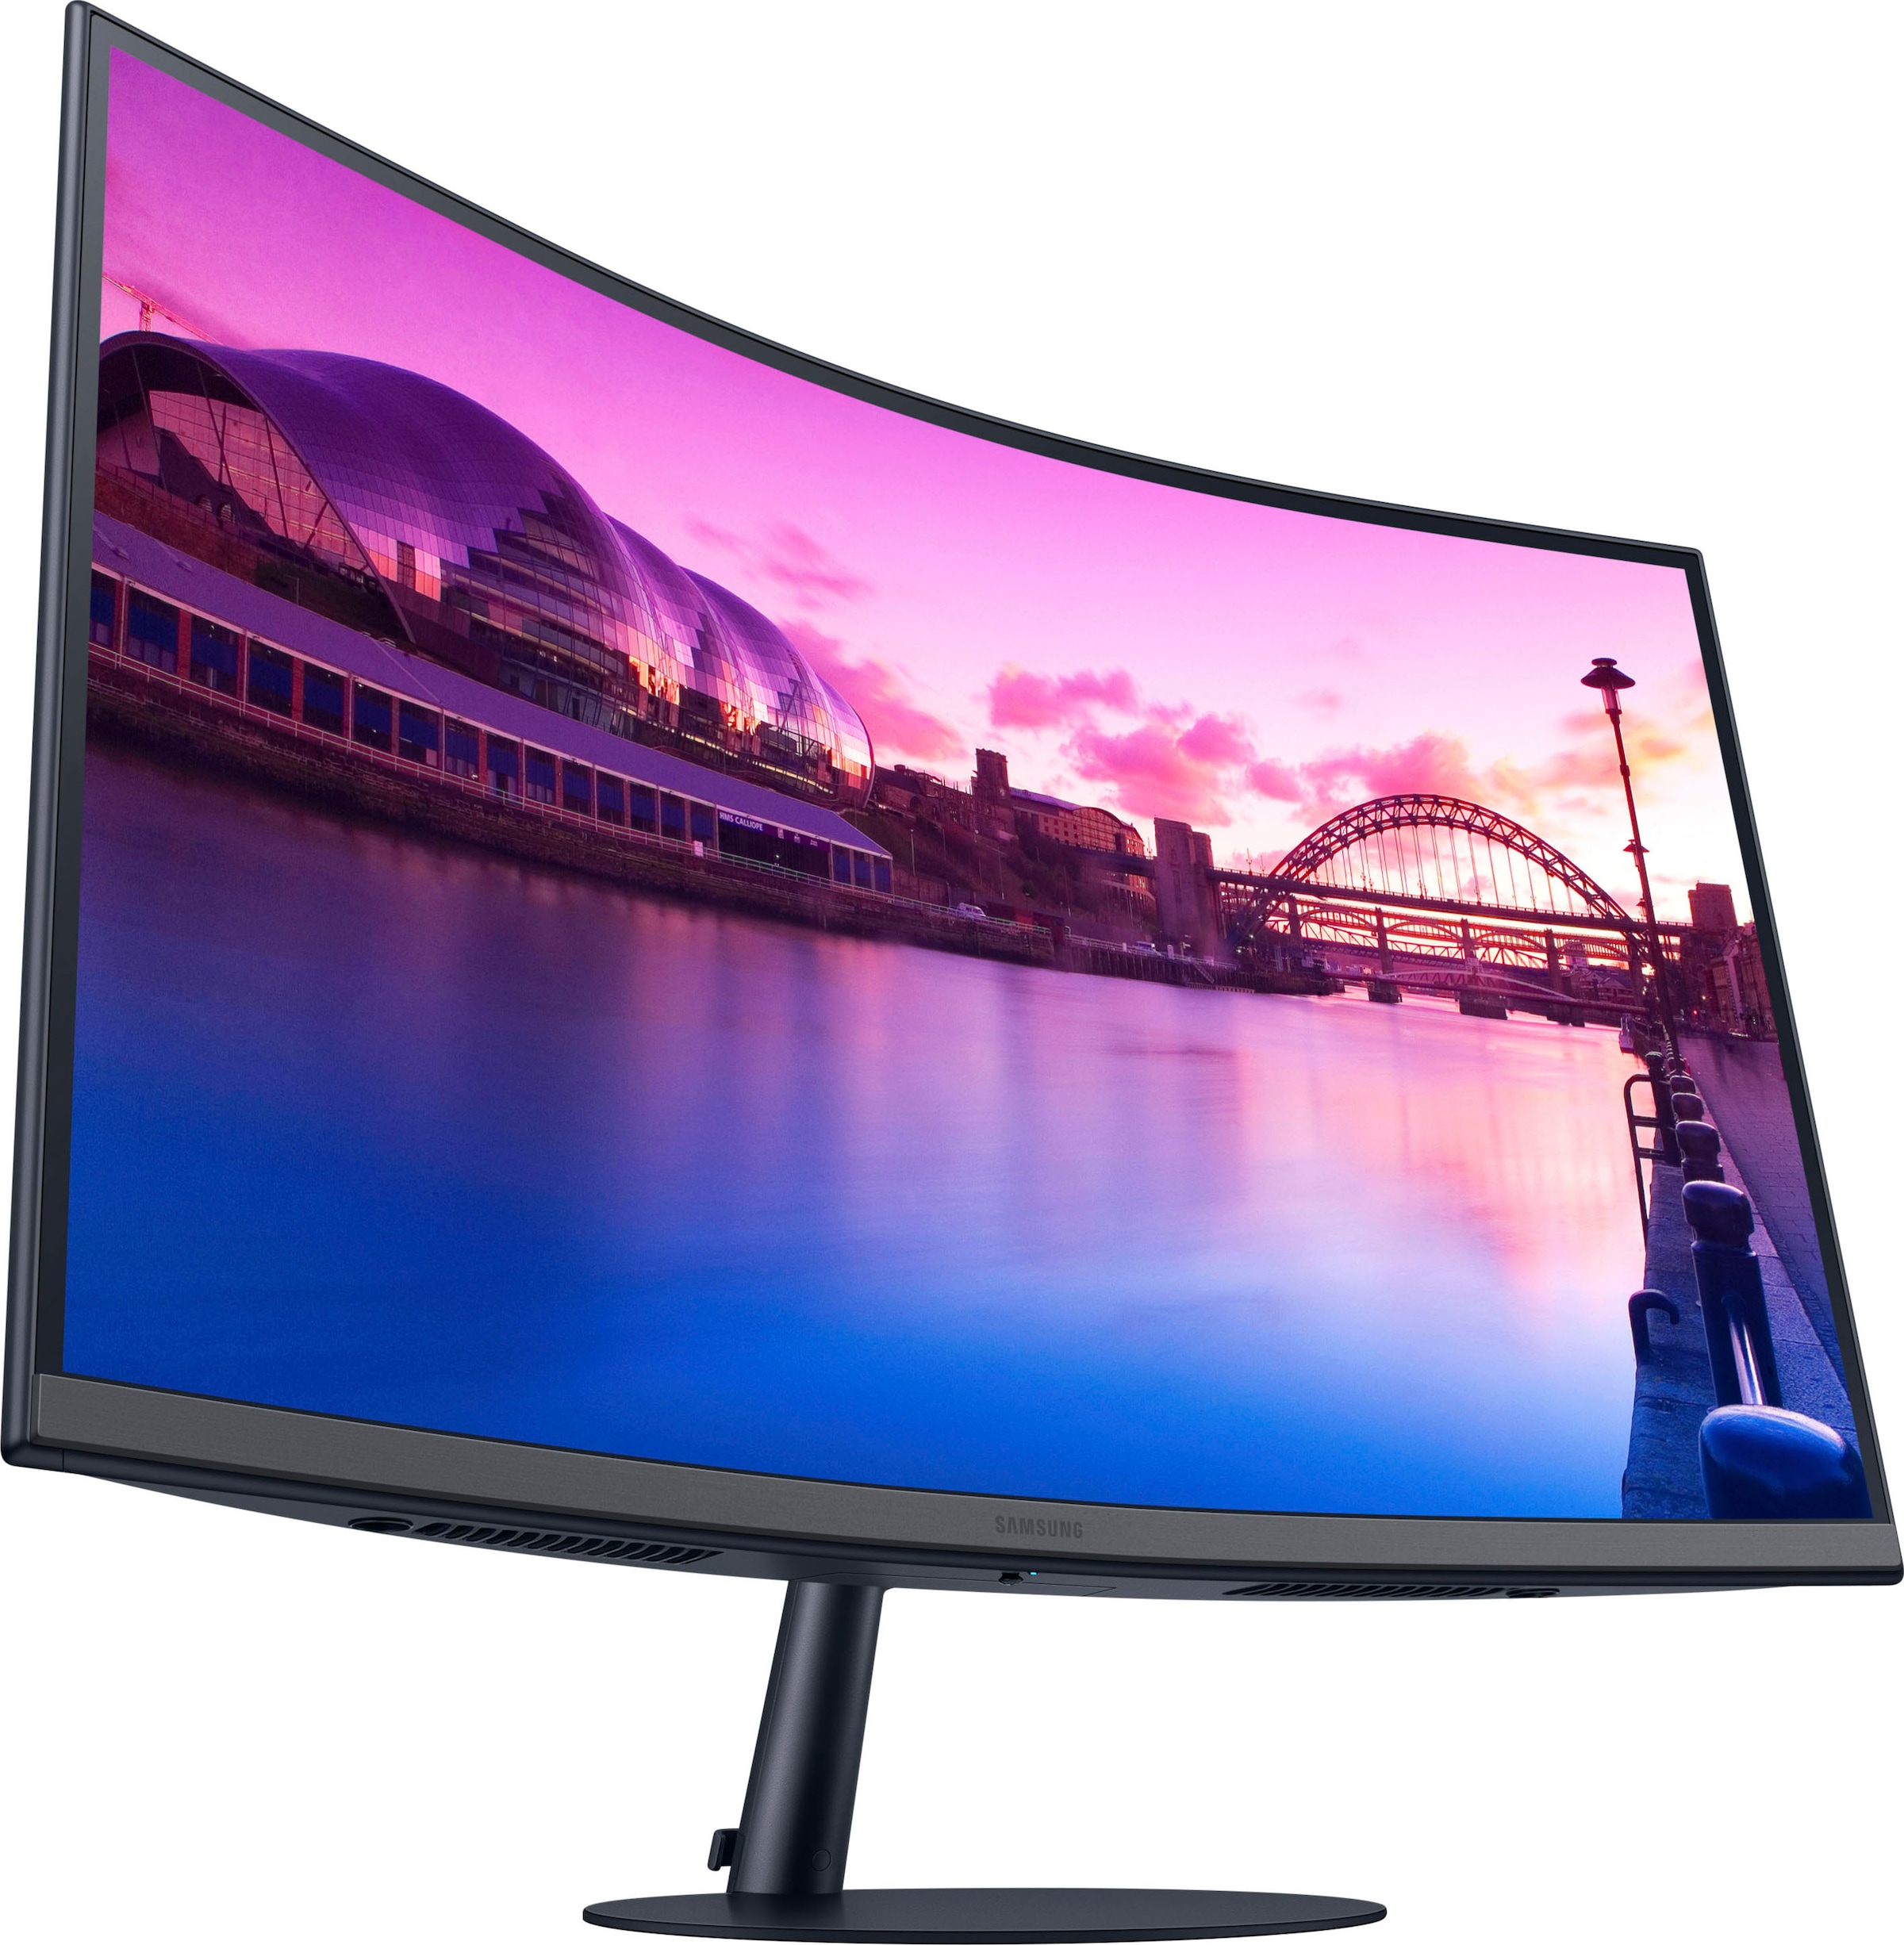 Reaktionszeit, cm/27 HD, OTTO px, online 4 75 1080 ms x Hz bei »S27C390EAU«, Curved-LED-Monitor Full 1920 Zoll, 68,6 Samsung